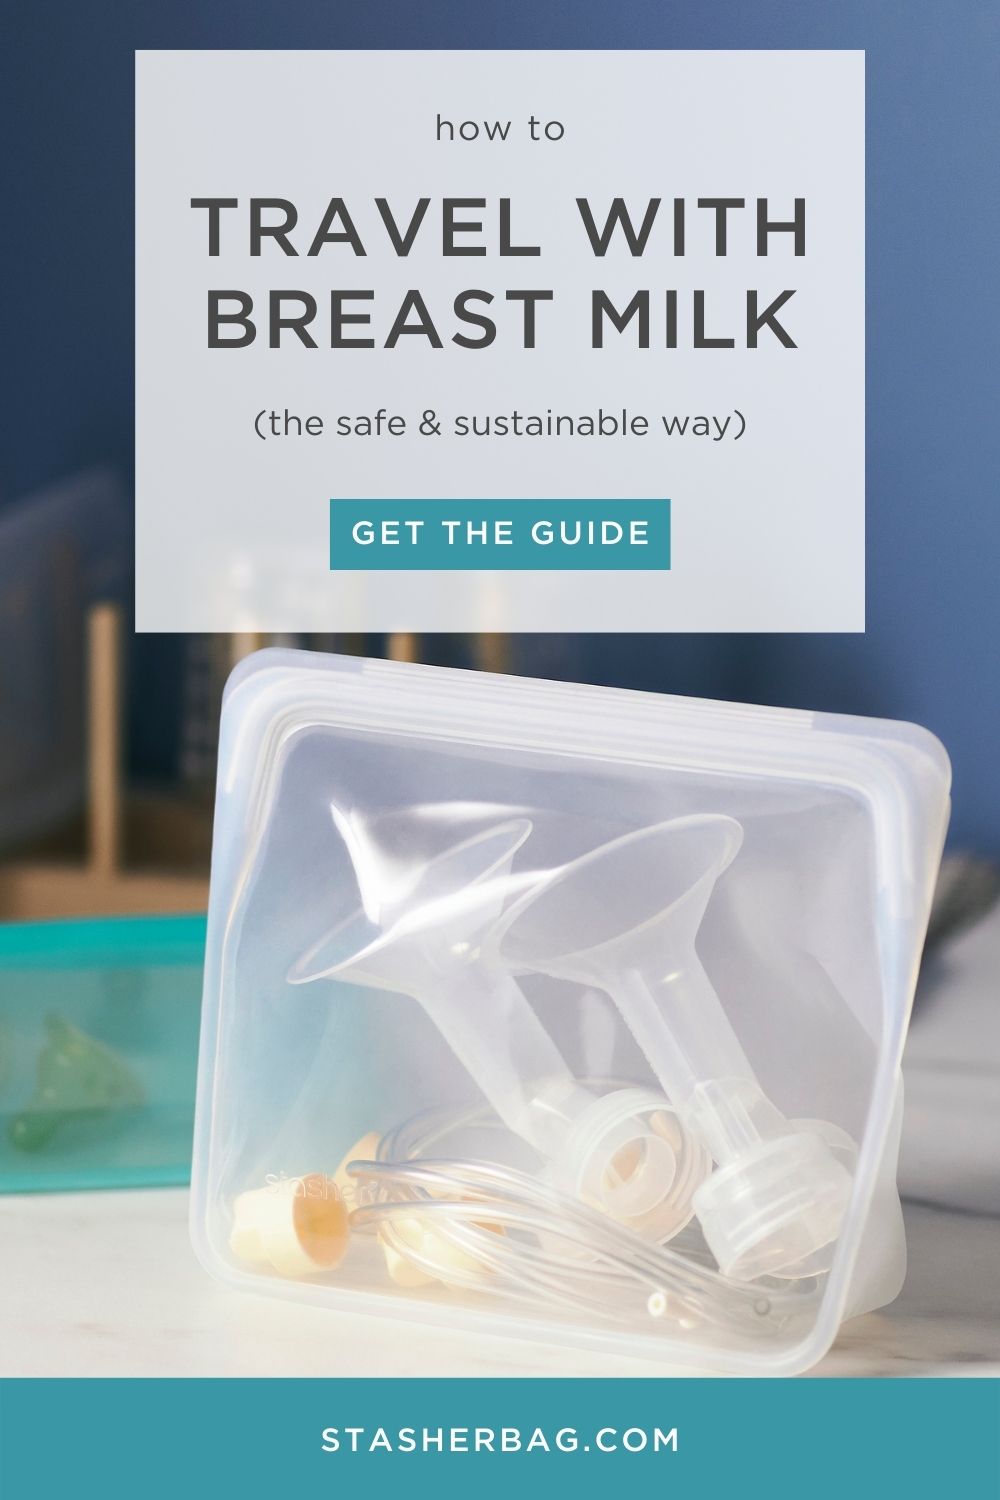 https://cdn.shopify.com/s/files/1/2237/5935/files/How_to_Travel_With_Breast_Milk.jpg?v=1657135121